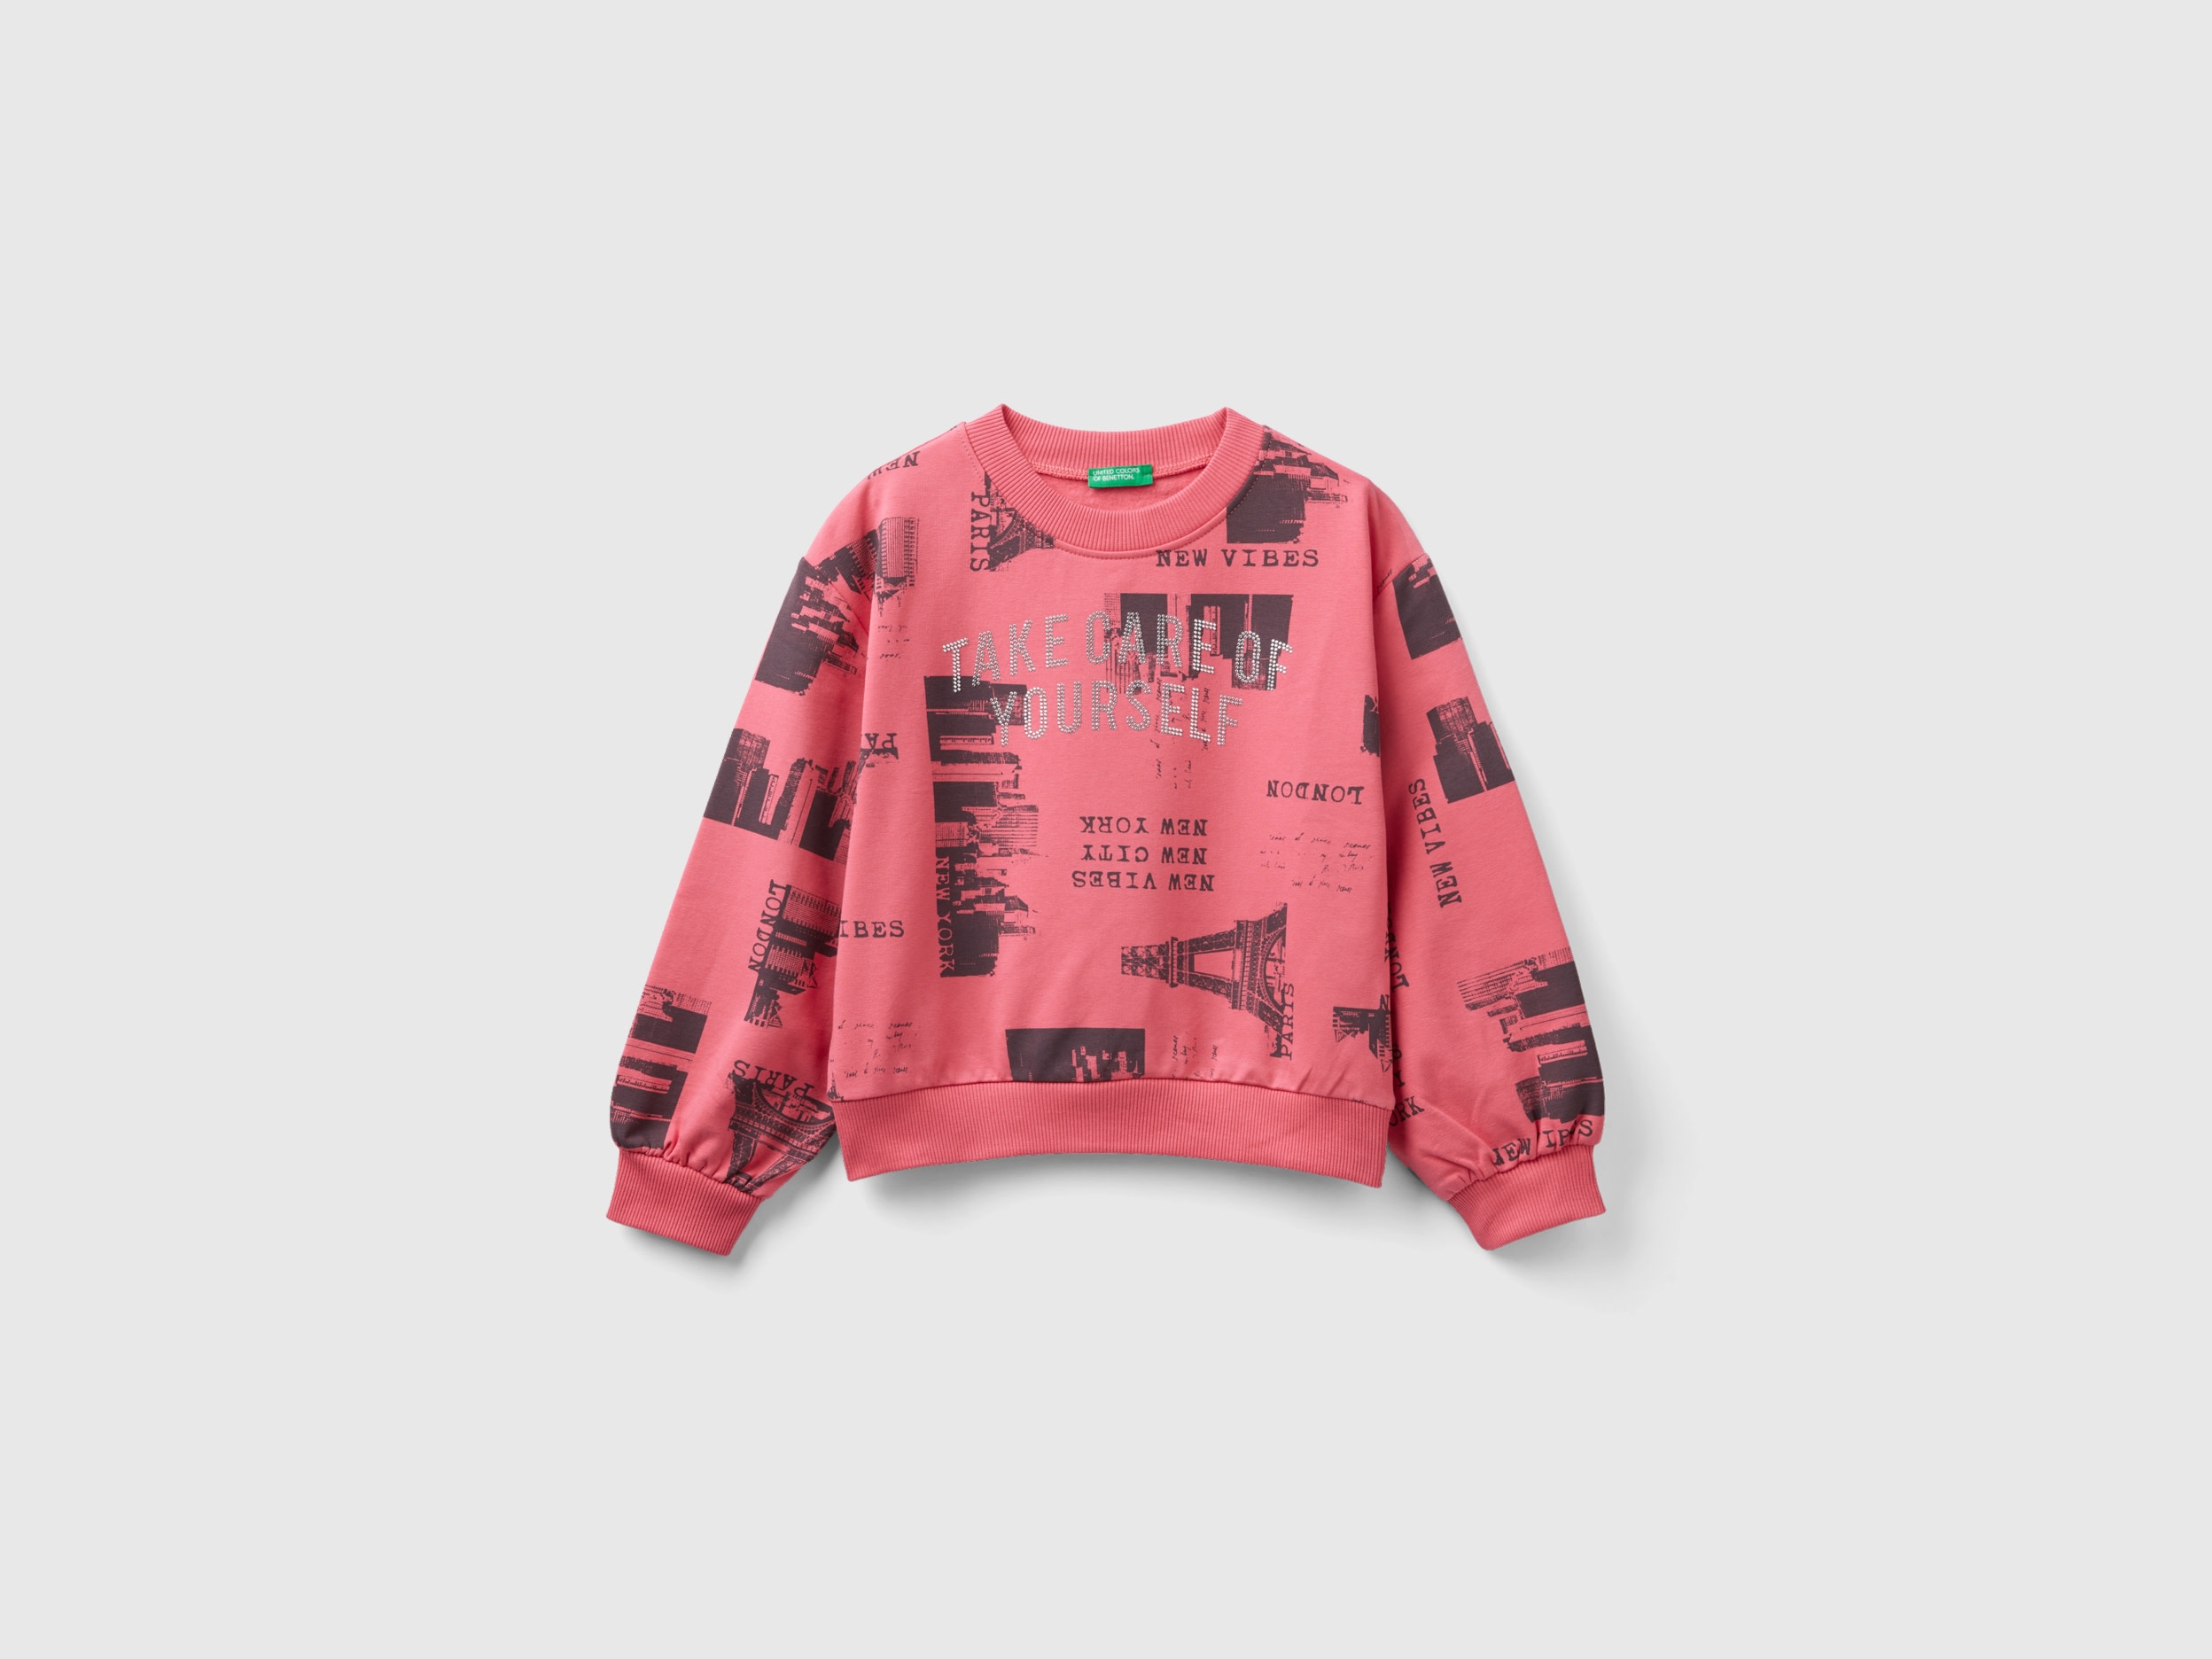 Benetton, Sweatshirt With City Print And Studs, size 2XL, Pink, Kids